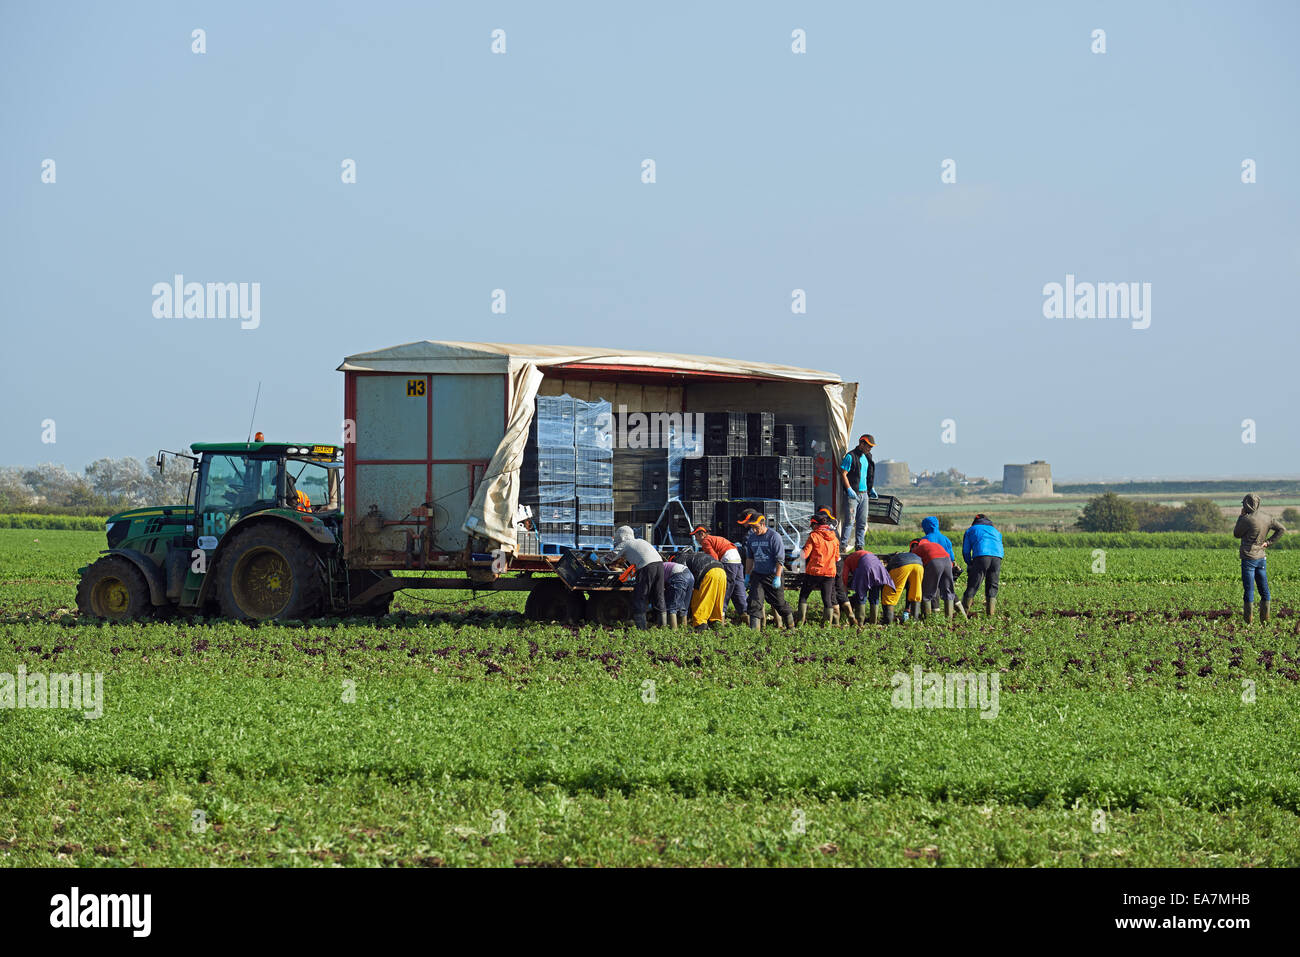 Migrant workers from Eastern Europe harvesting lettuces, Bawdsey, Suffolk, UK. Stock Photo